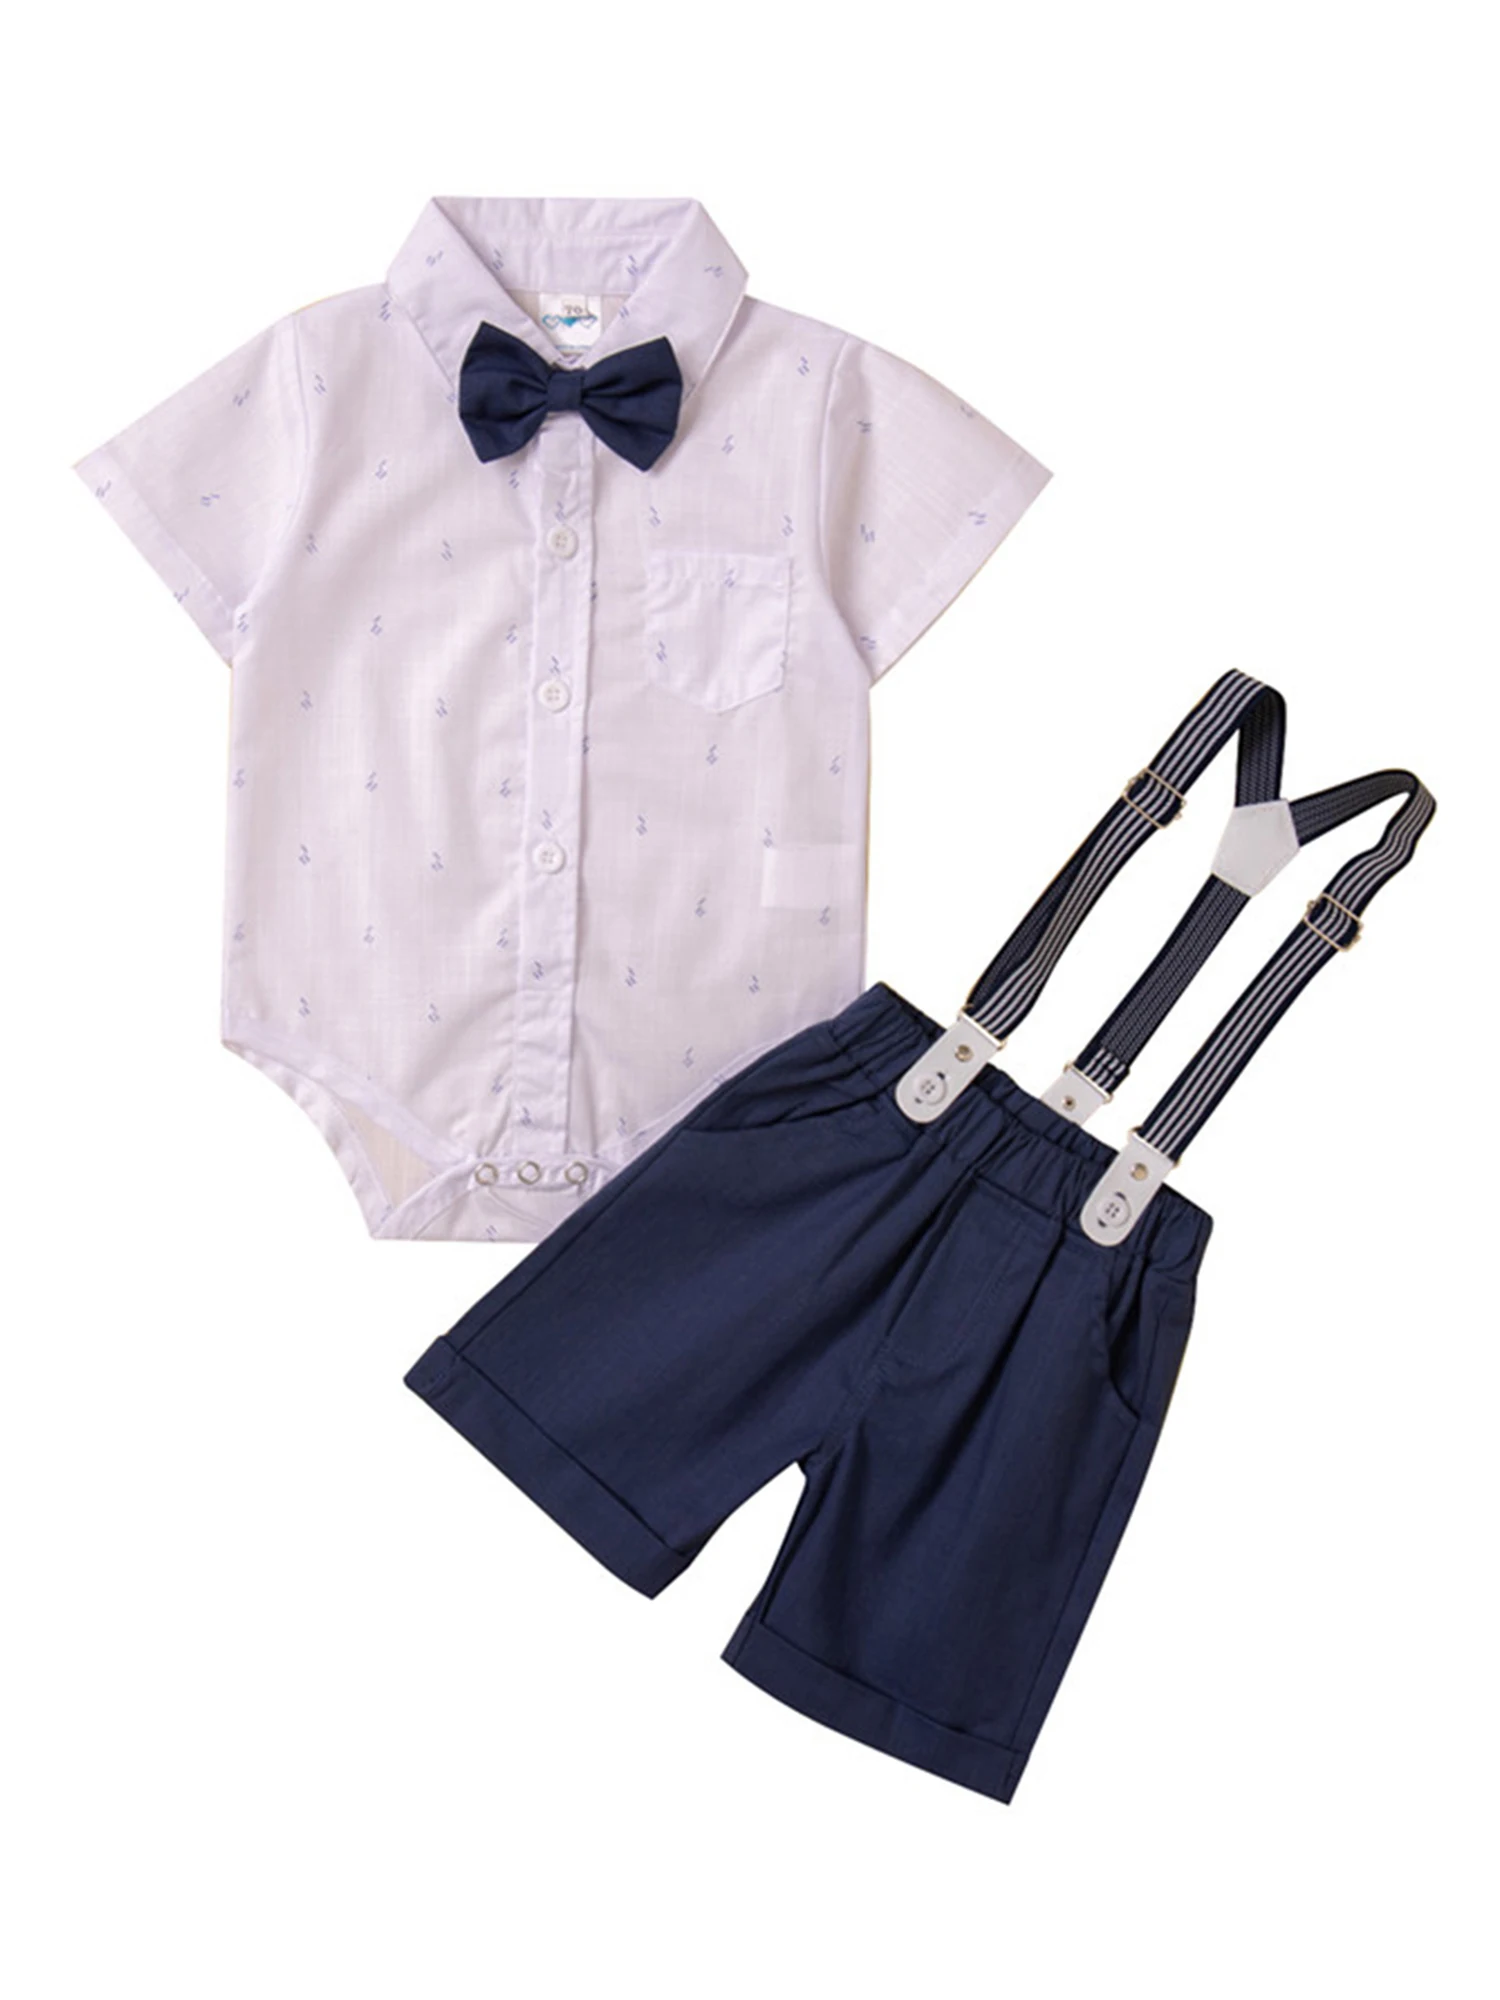 

Toddler Baby Boy Gentleman Clothes Outfit Button Short Sleeve Jumpsuit with Bow Tie Tuxedo Bodysuit Romper Shorts Set